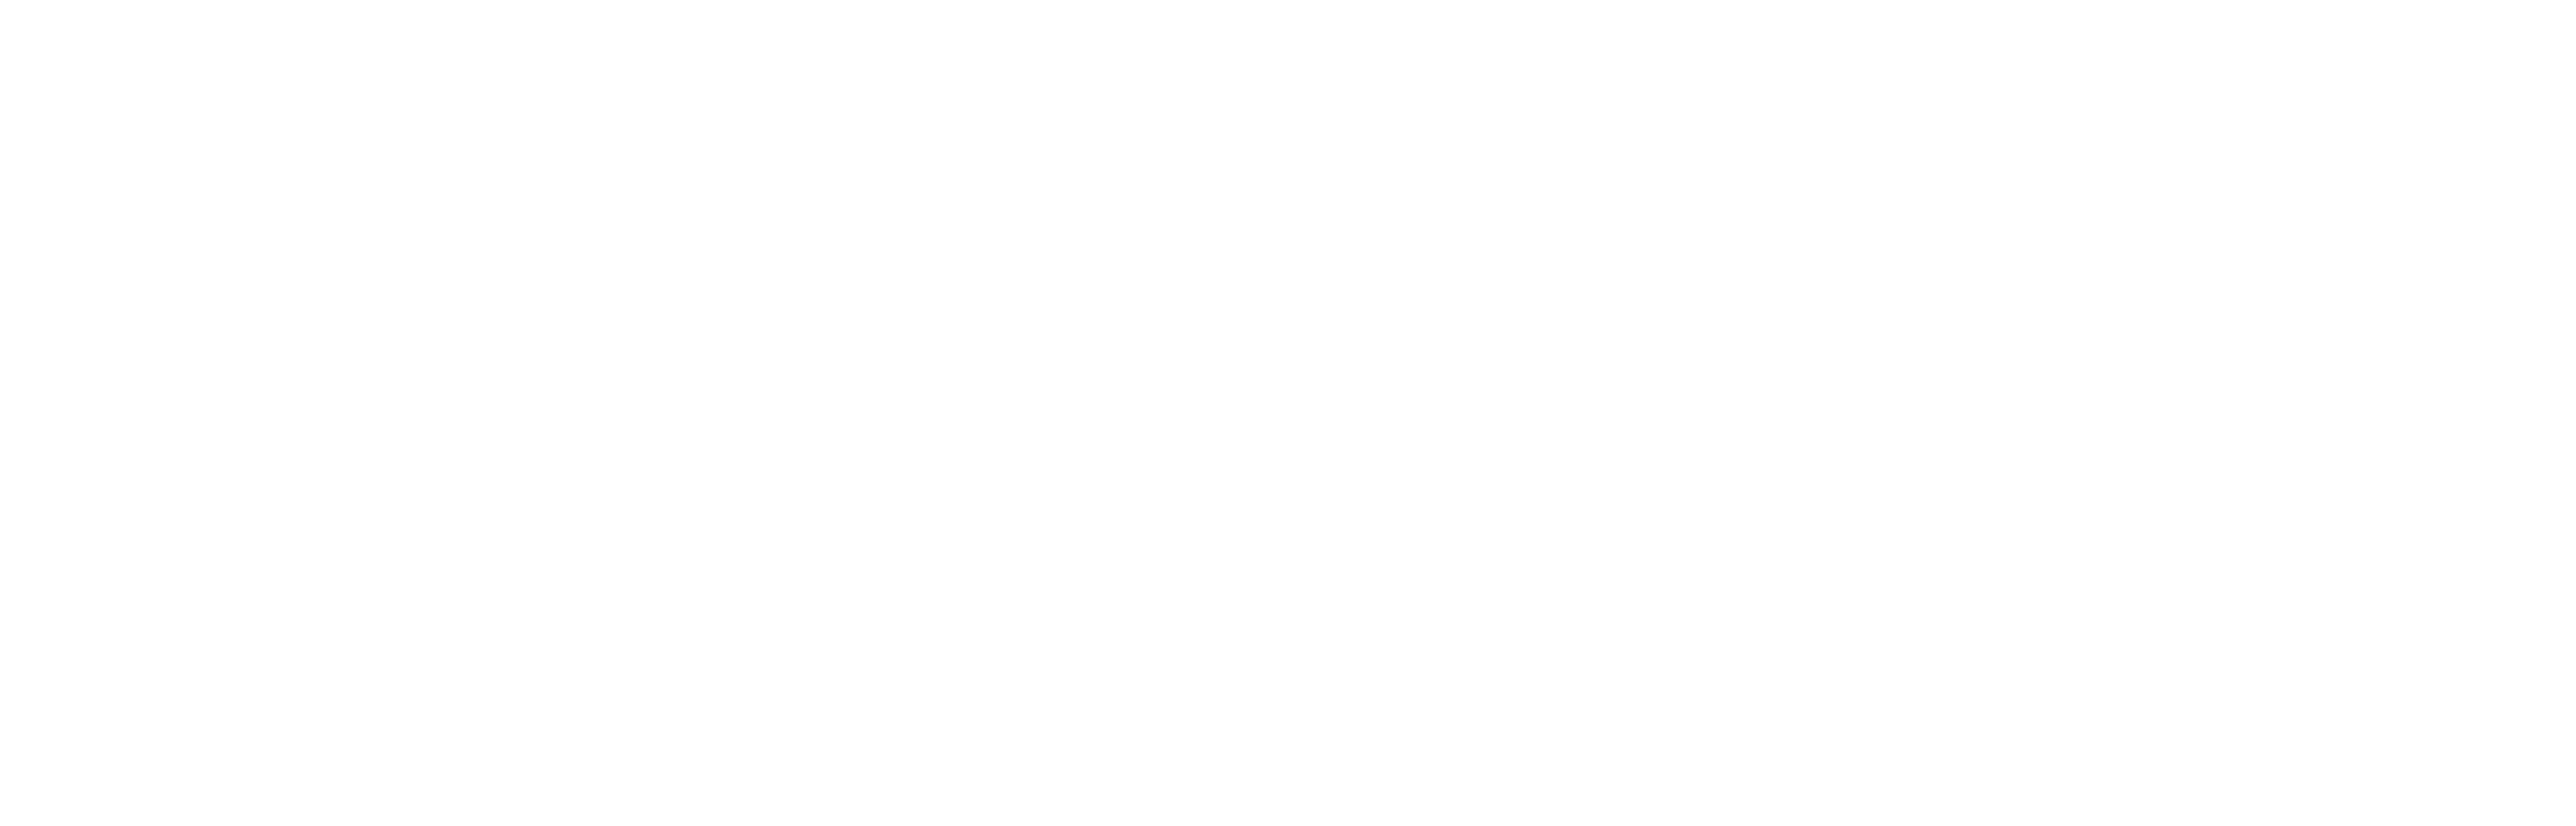 Showcasing artists using AI to push the limits of creativity with a positive message on sustainability